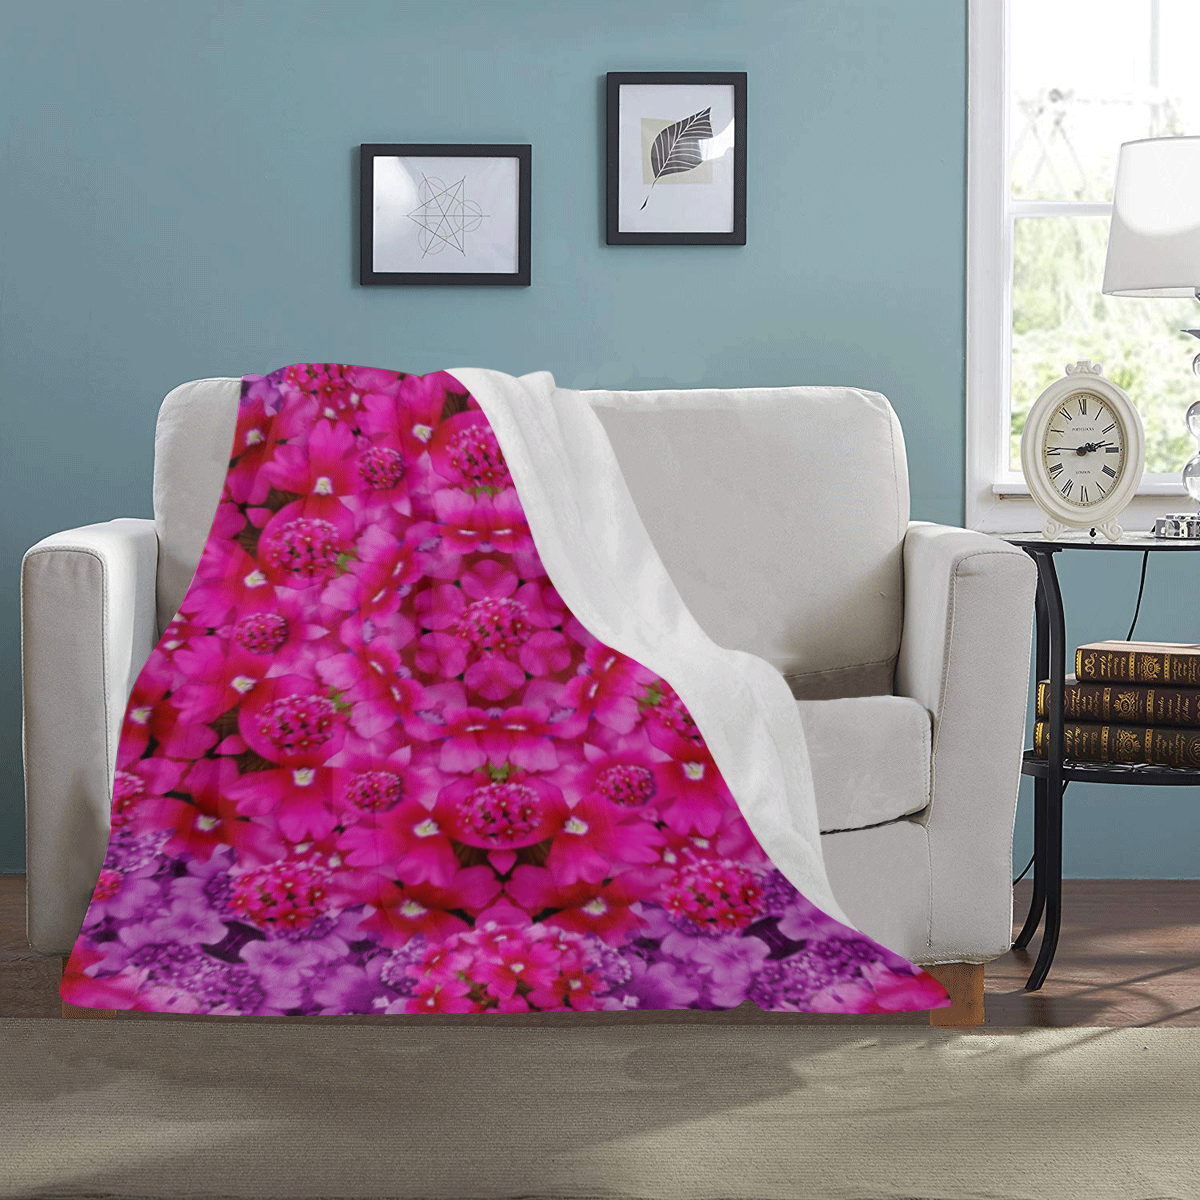 flower suprise to love and enjoy Ultra-Soft Micro Fleece Blanket 30''x40''